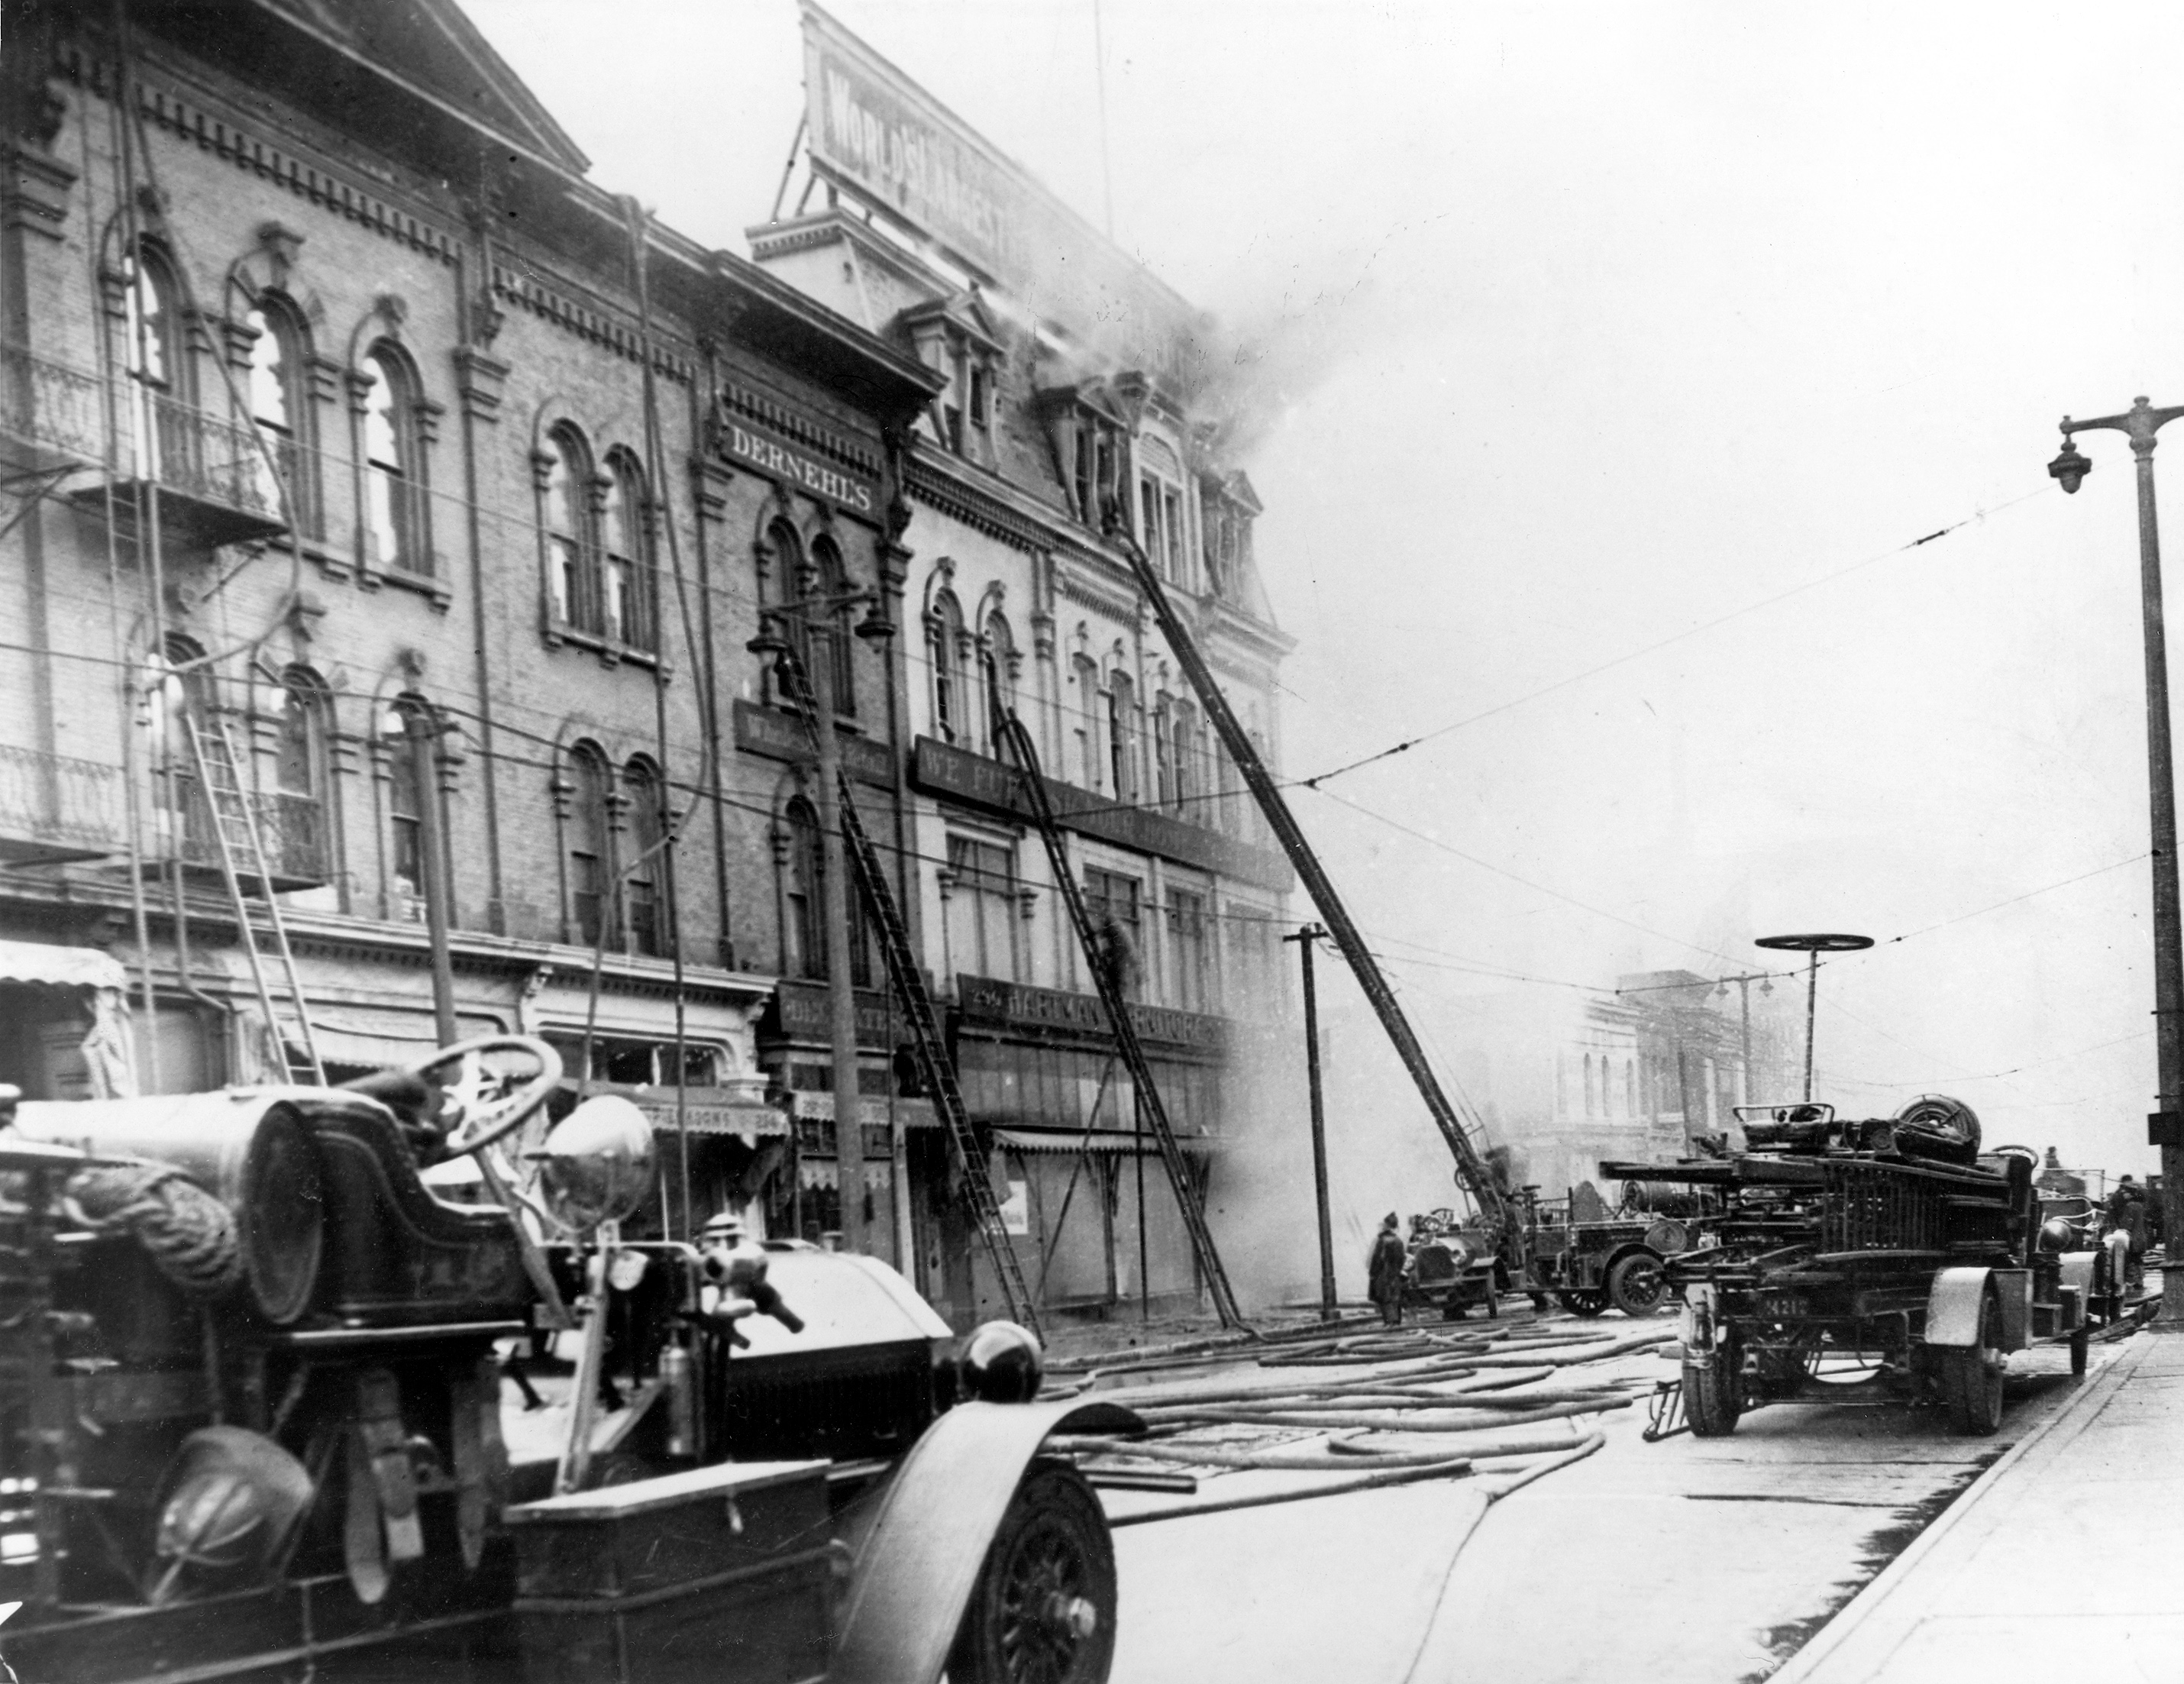 Firefighters battle a blaze at the Hartman Furniture store in June 1926. The fire was so large that 150 firefighters were needed to combat it.